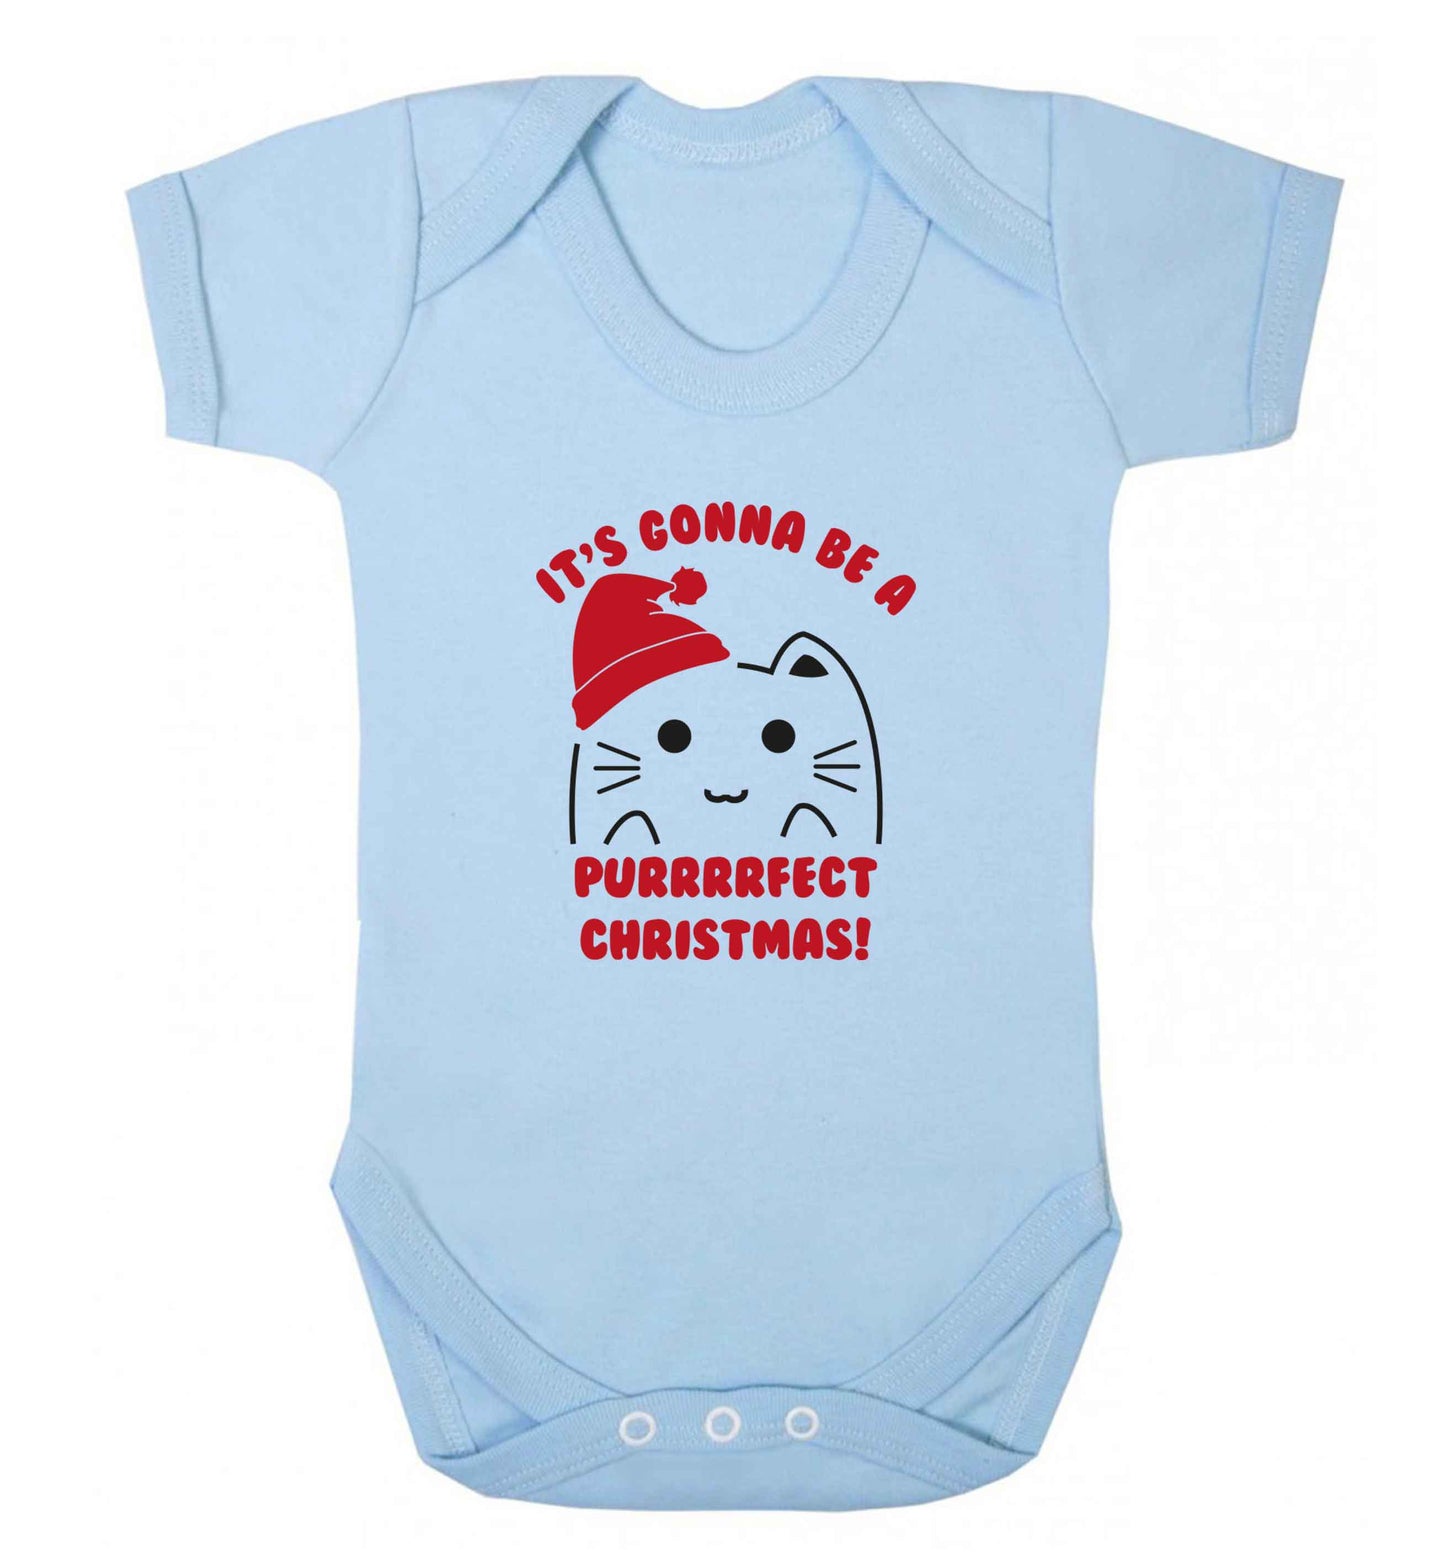 It's going to be a purrfect Christmas baby vest pale blue 18-24 months